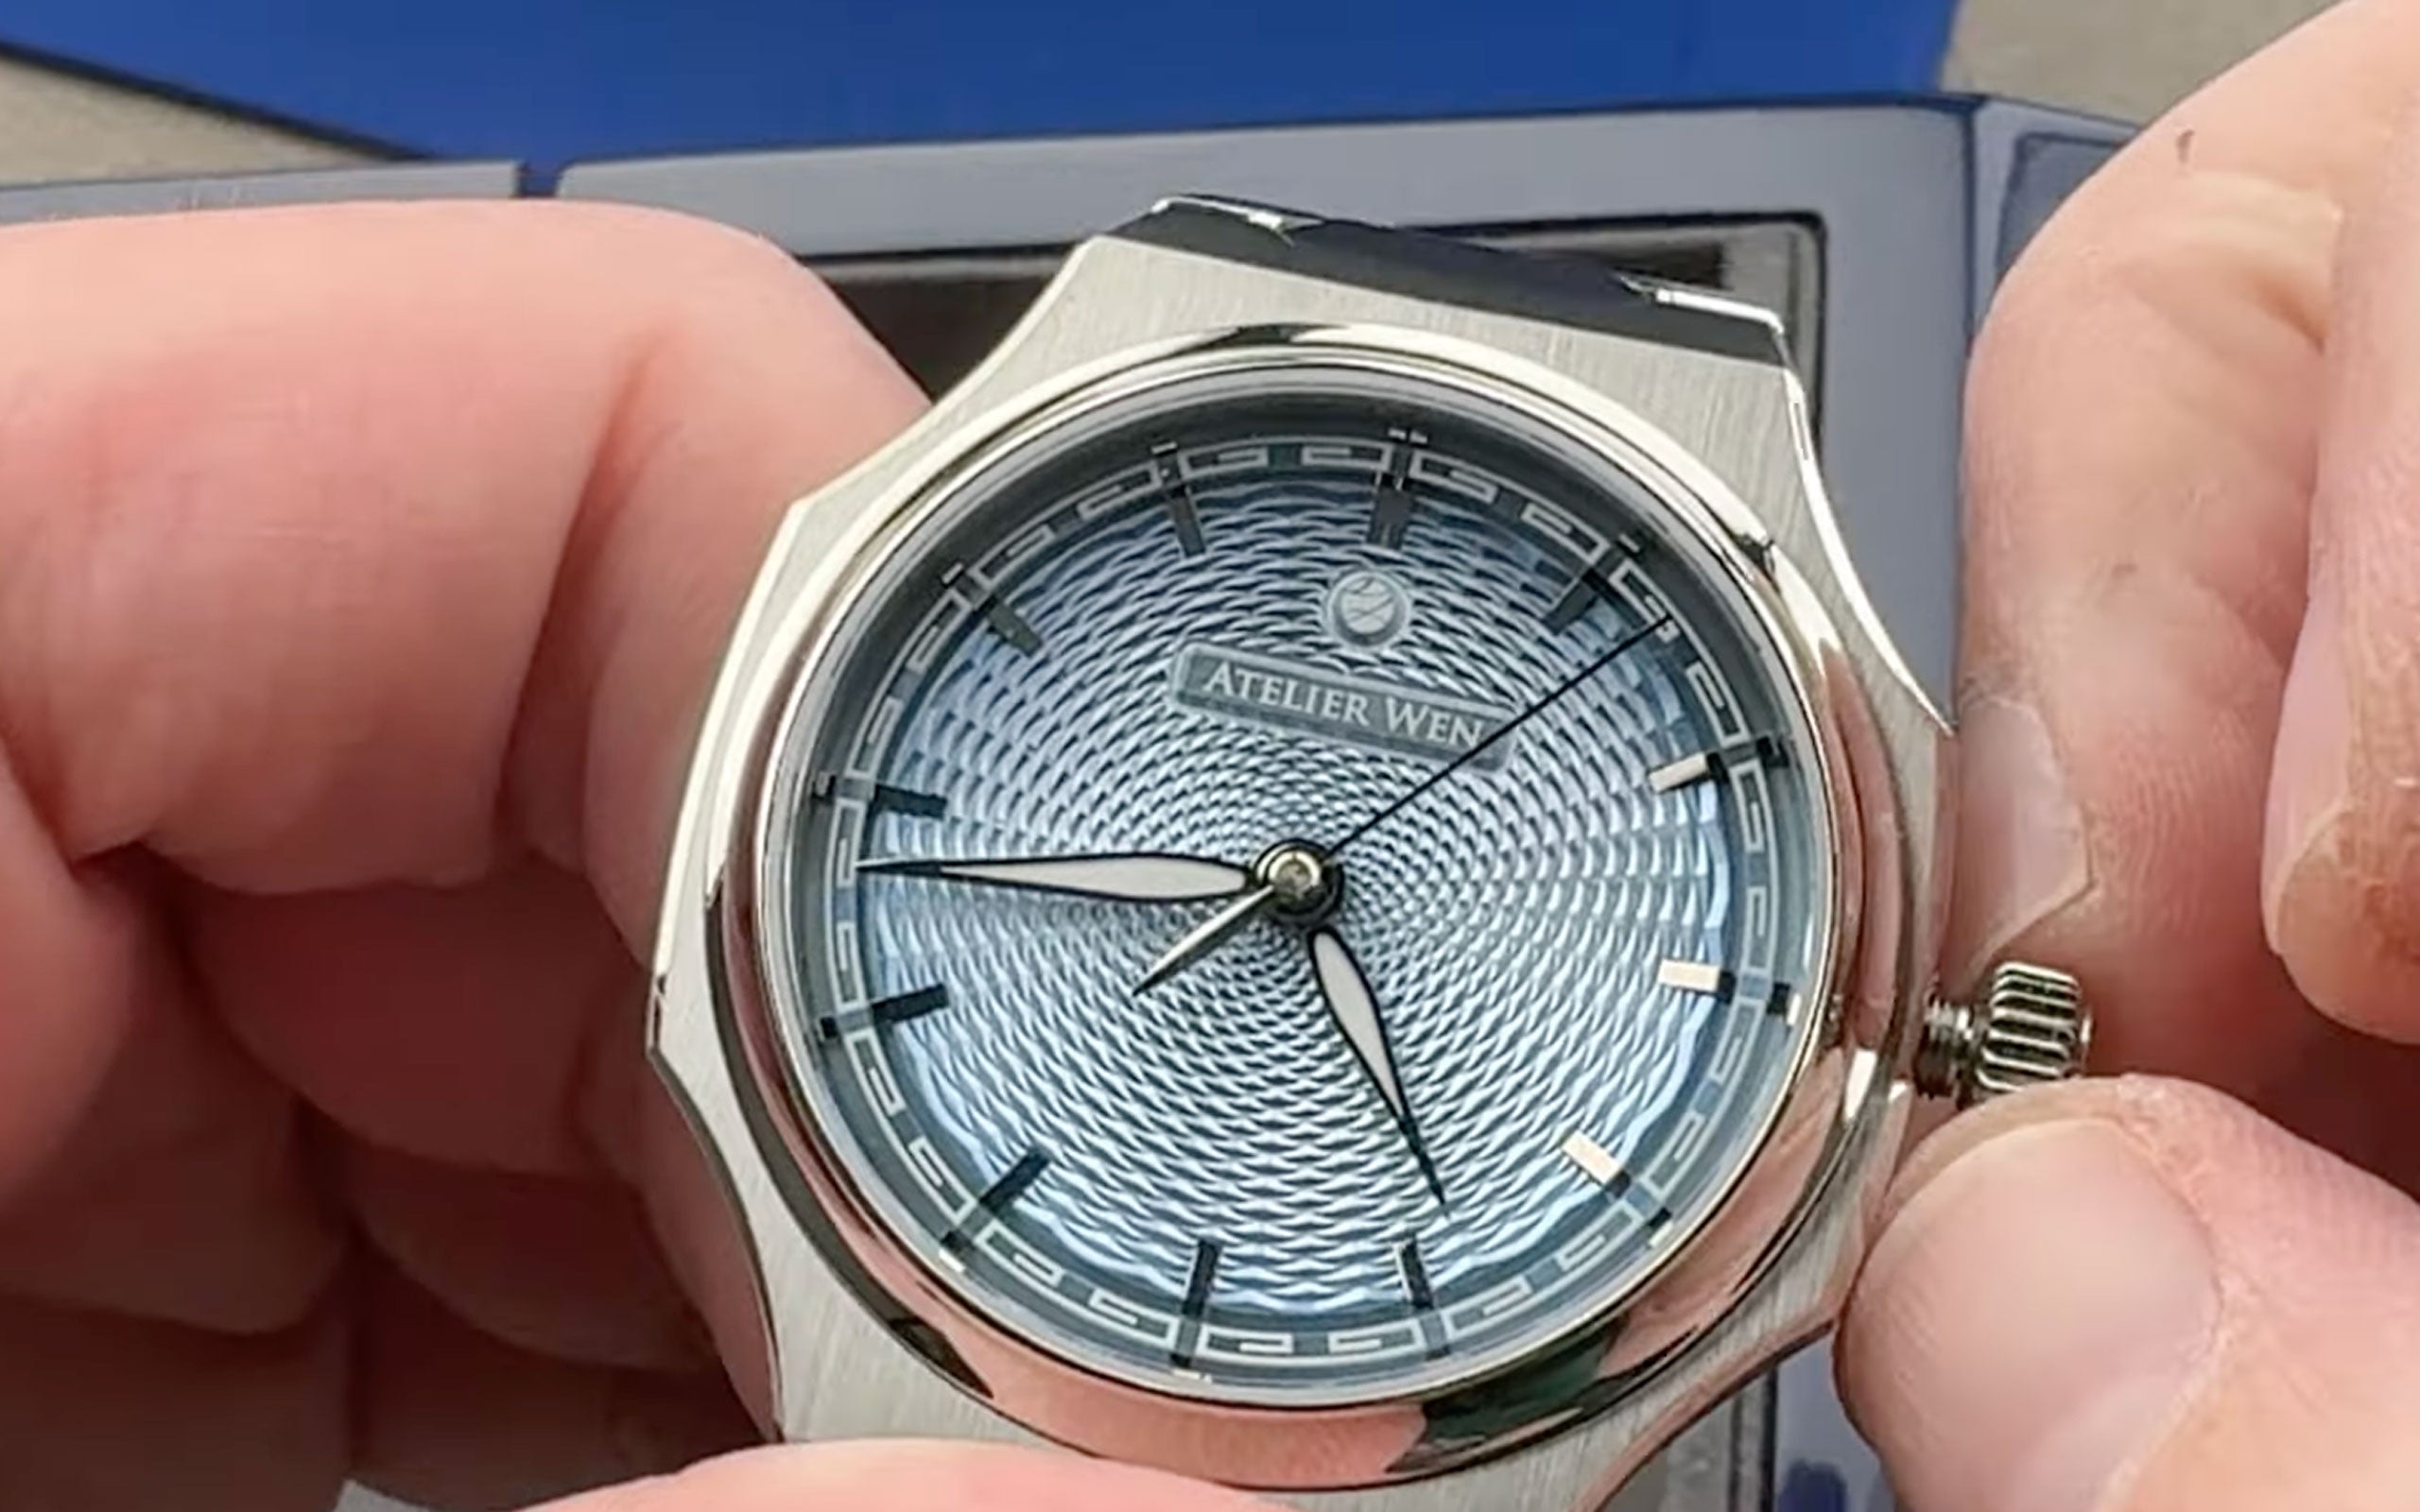 Unboxing - Can a Chinese Watch Be Luxury? Atelier Wen Perception V2 Review